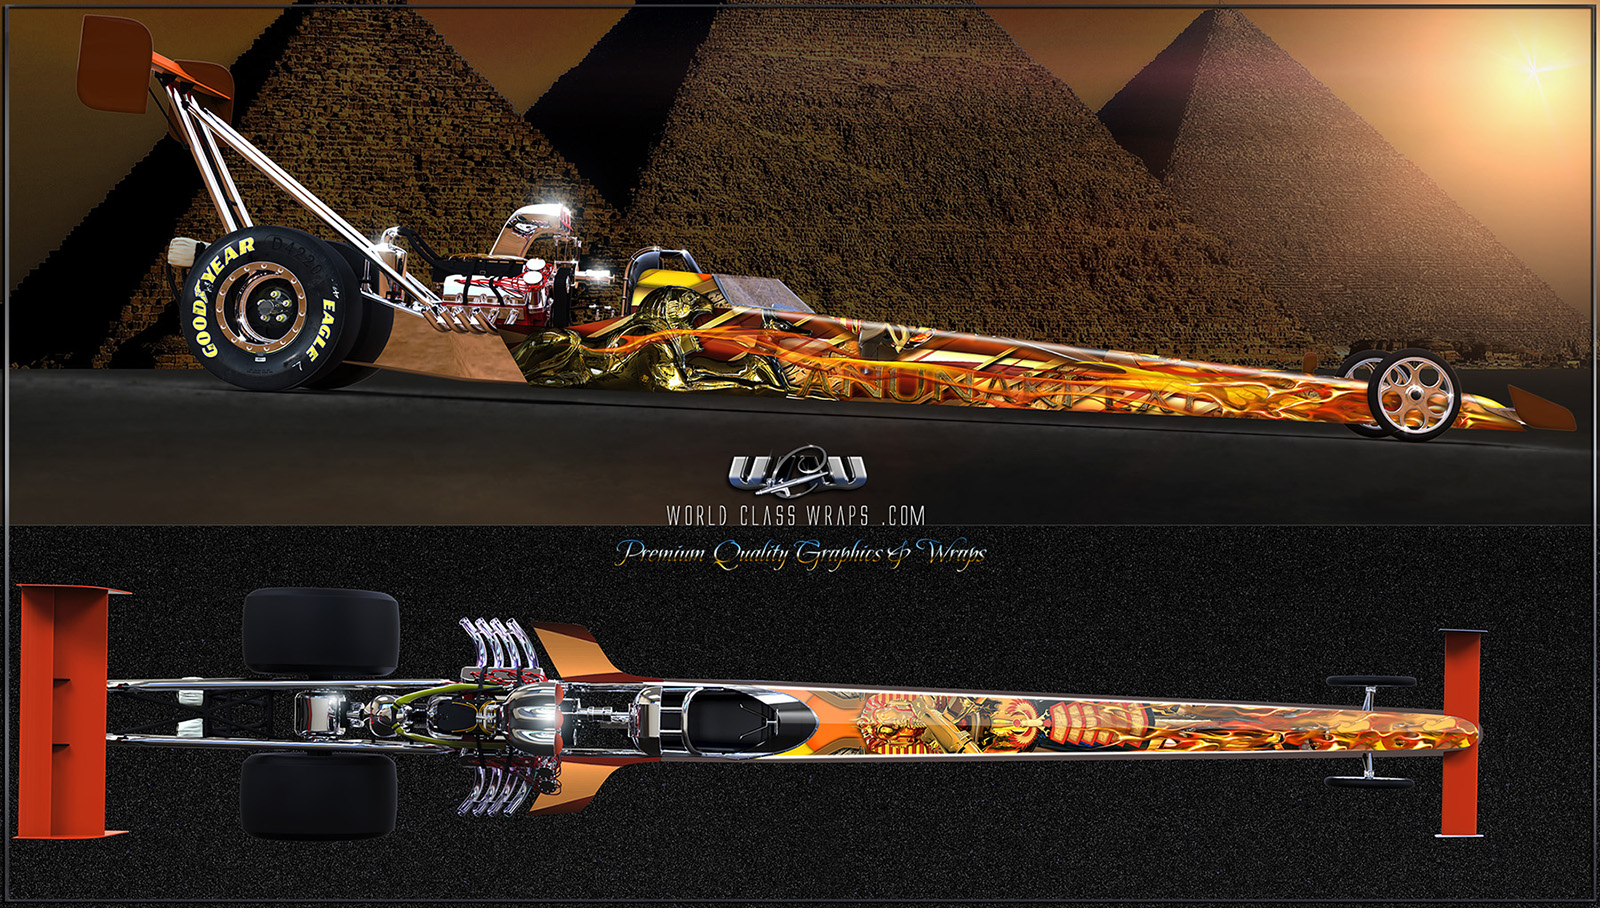 Anunaki Express full scale dragster wrap